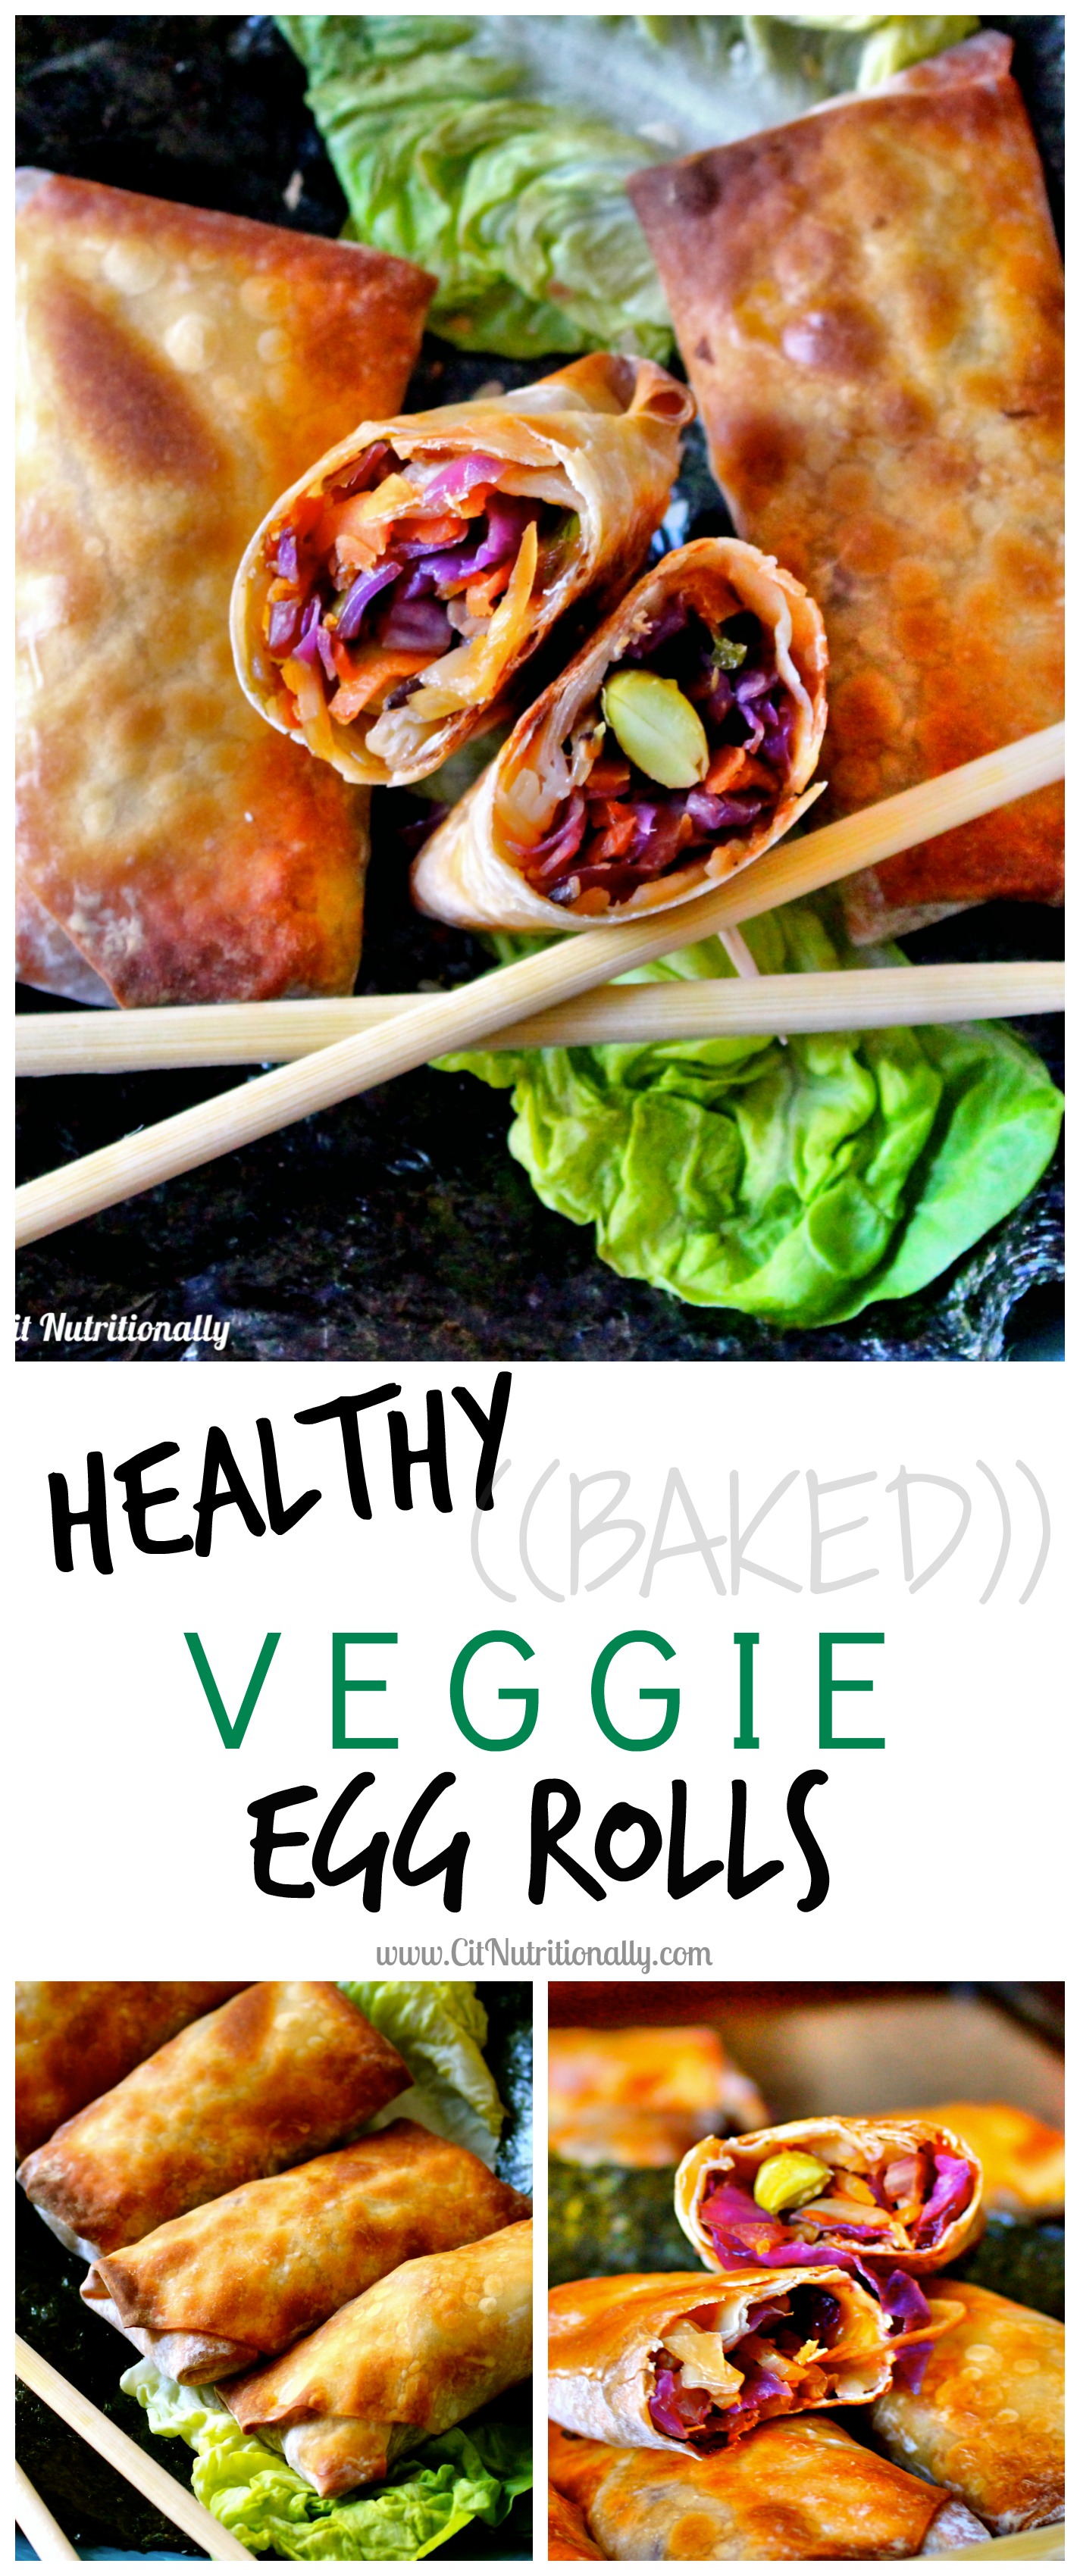 For a healthier take out, try my Healthy Baked Vegetable Egg Rolls with a full serving of vegetables in each egg roll! | C it Nutritionally